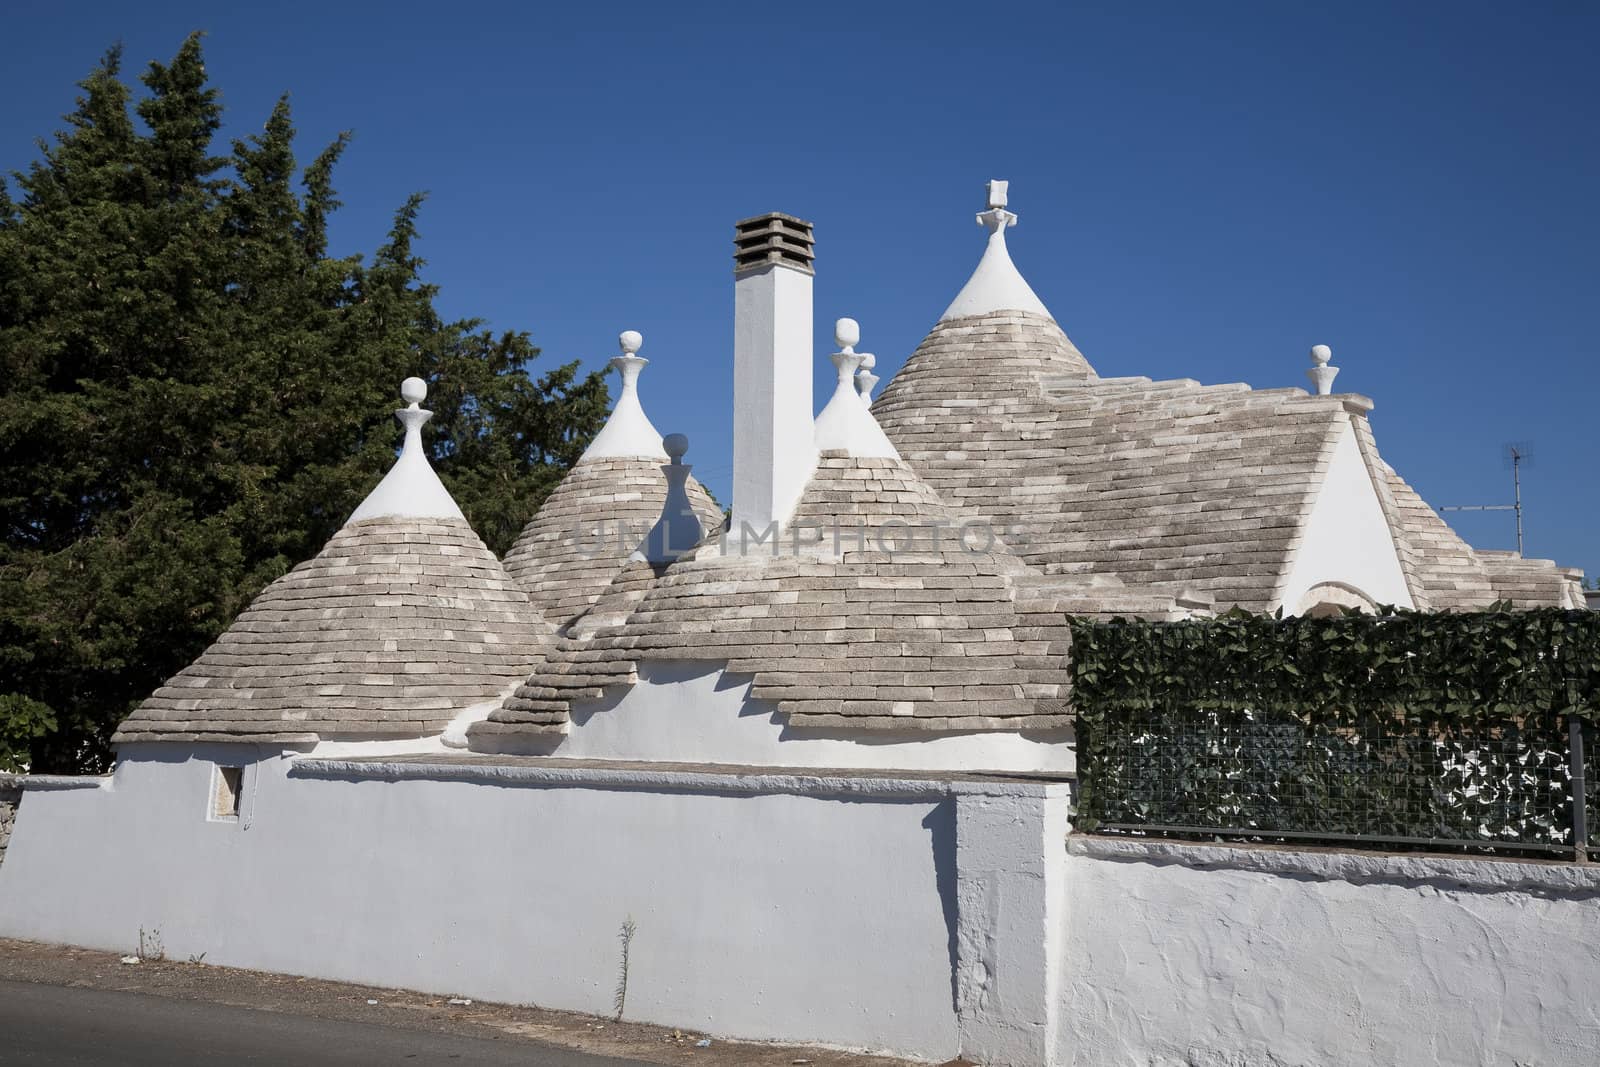 Modern rural trullo villa against a blue sky - Italy. A trullo is a traditional Apulian stone dwelling with a conical roof. The style of construction is specific to Itria Valley.